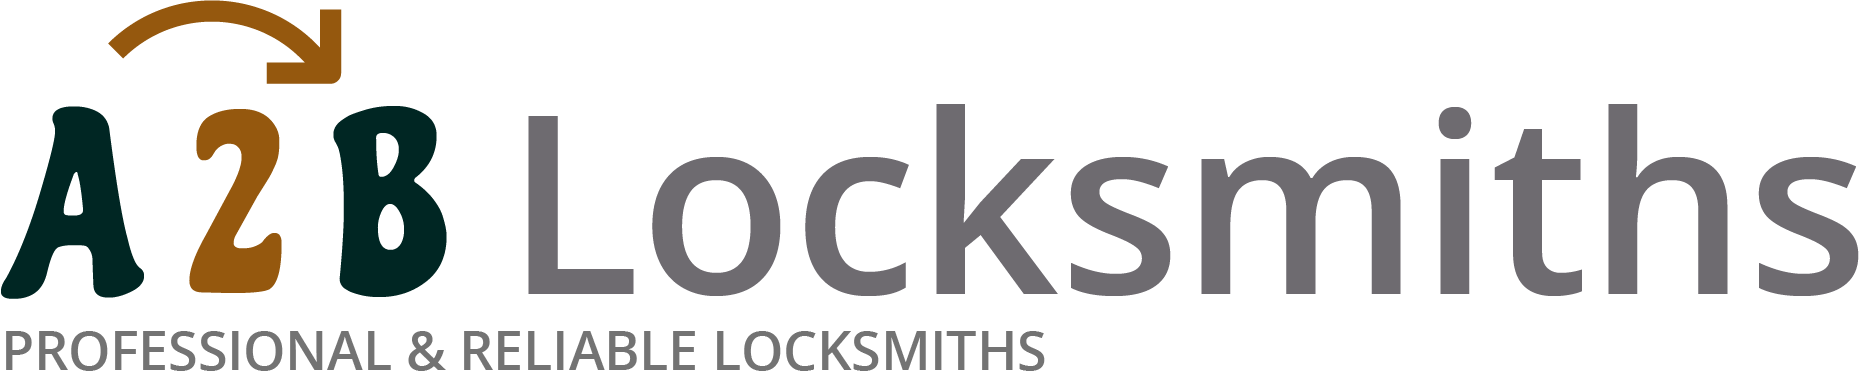 If you are locked out of house in Teddington, our 24/7 local emergency locksmith services can help you.